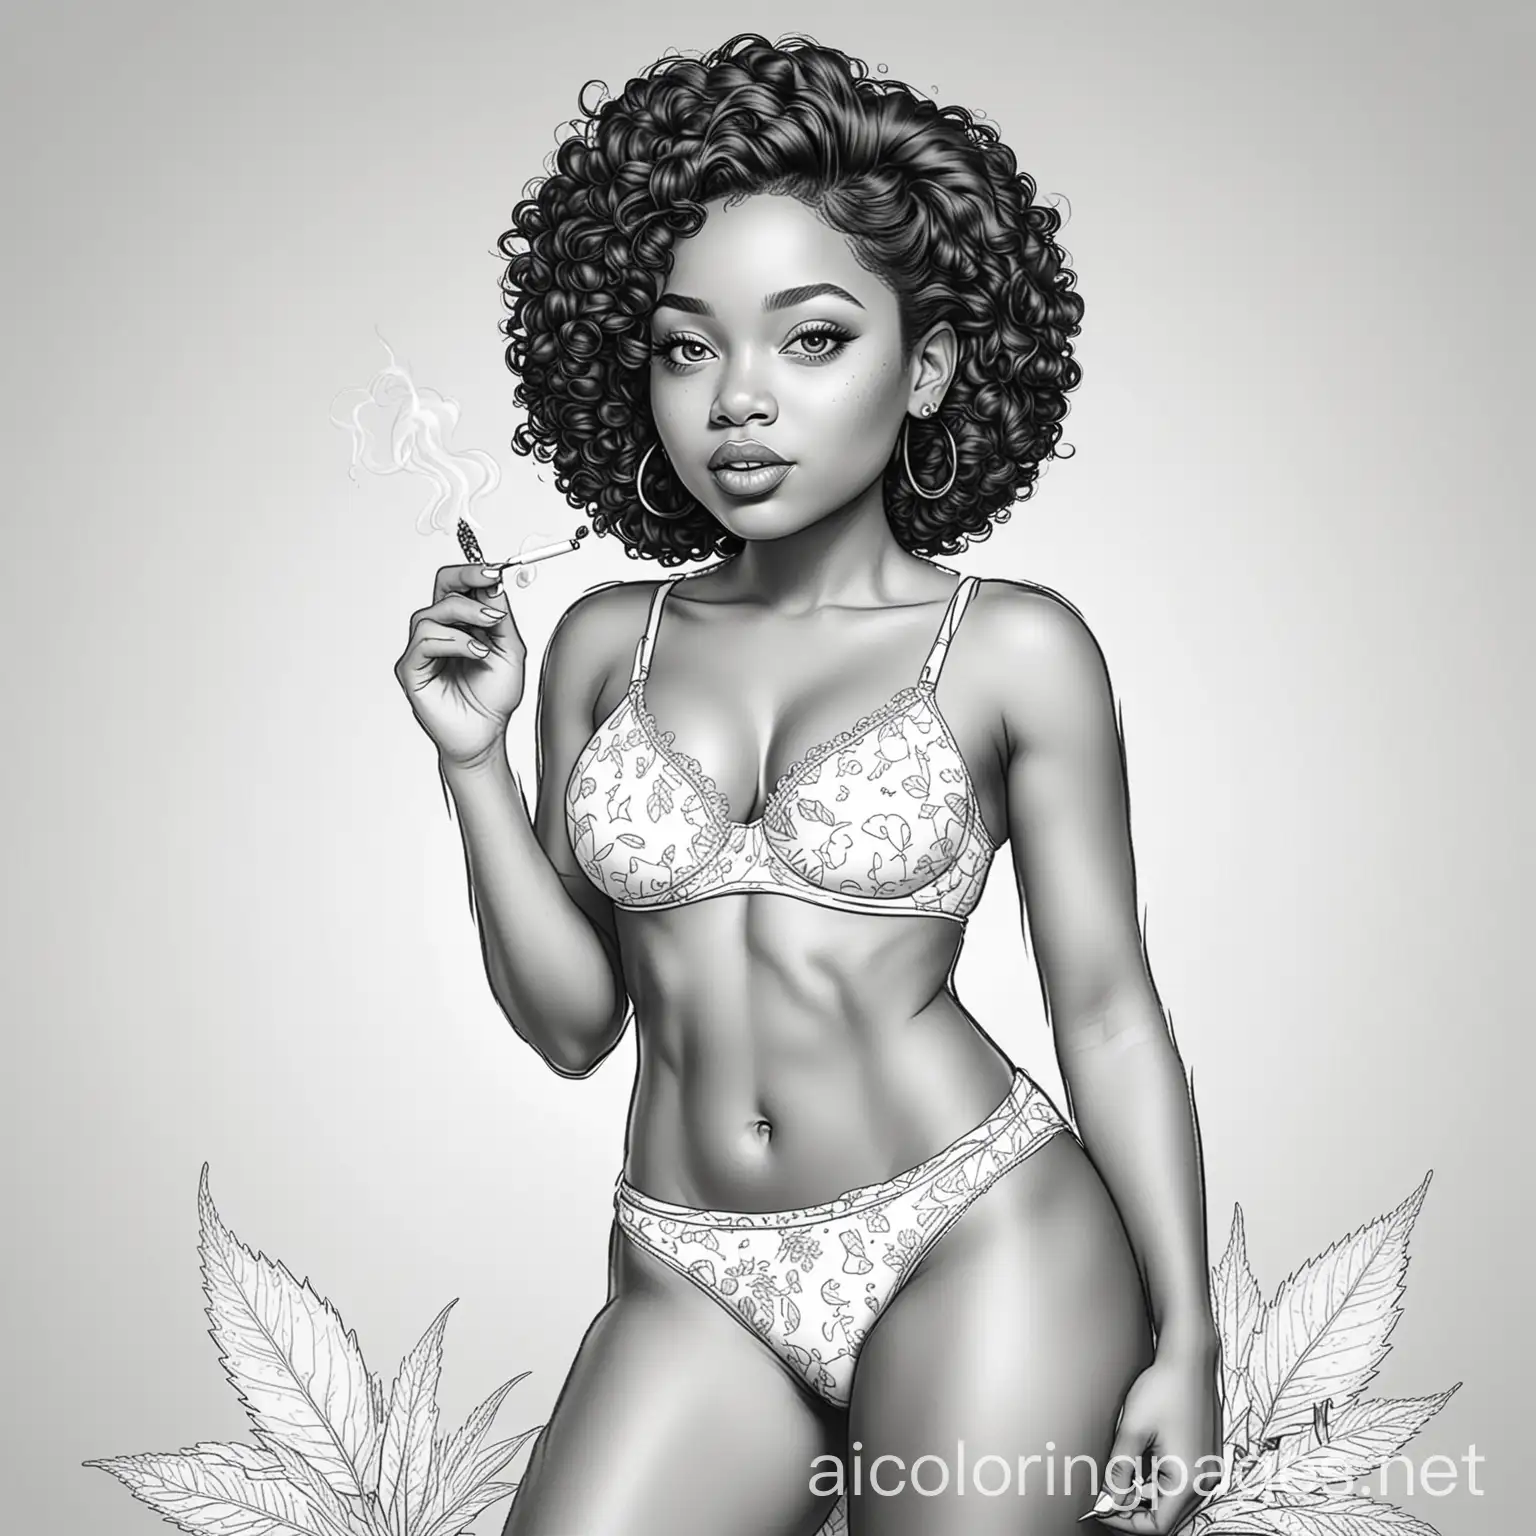 black girl smoking weed in underwear, Coloring Page, black and white, line art, white background, Simplicity, Ample White Space. The background of the coloring page is plain white to make it easy for young children to color within the lines. The outlines of all the subjects are easy to distinguish, making it simple for kids to color without too much difficulty